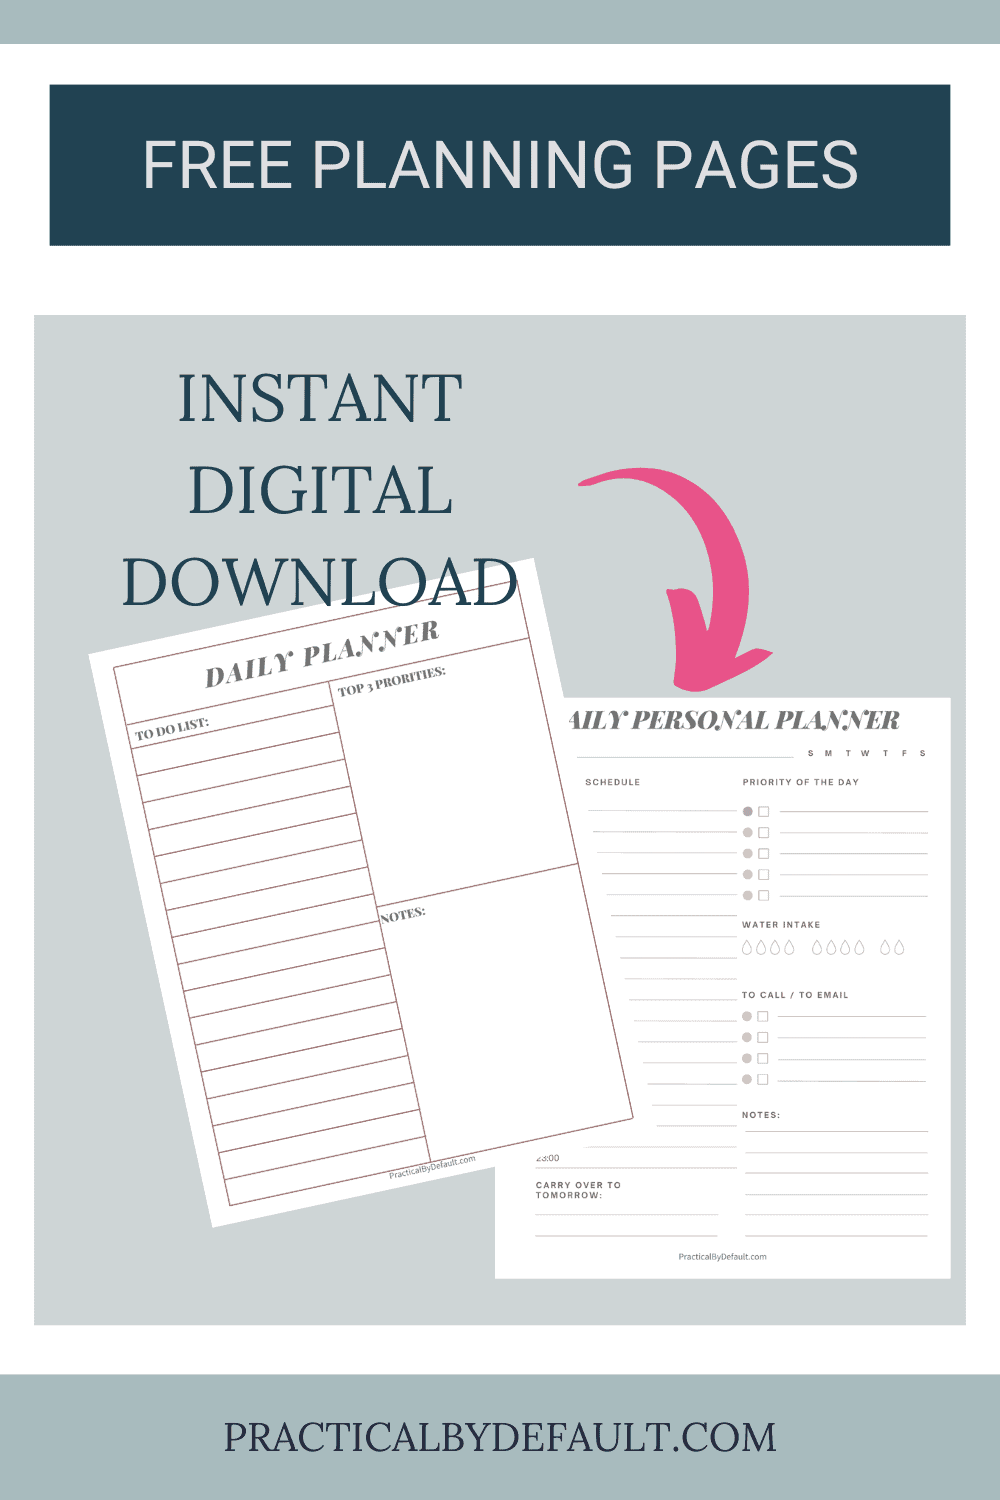 Free Planning Pages